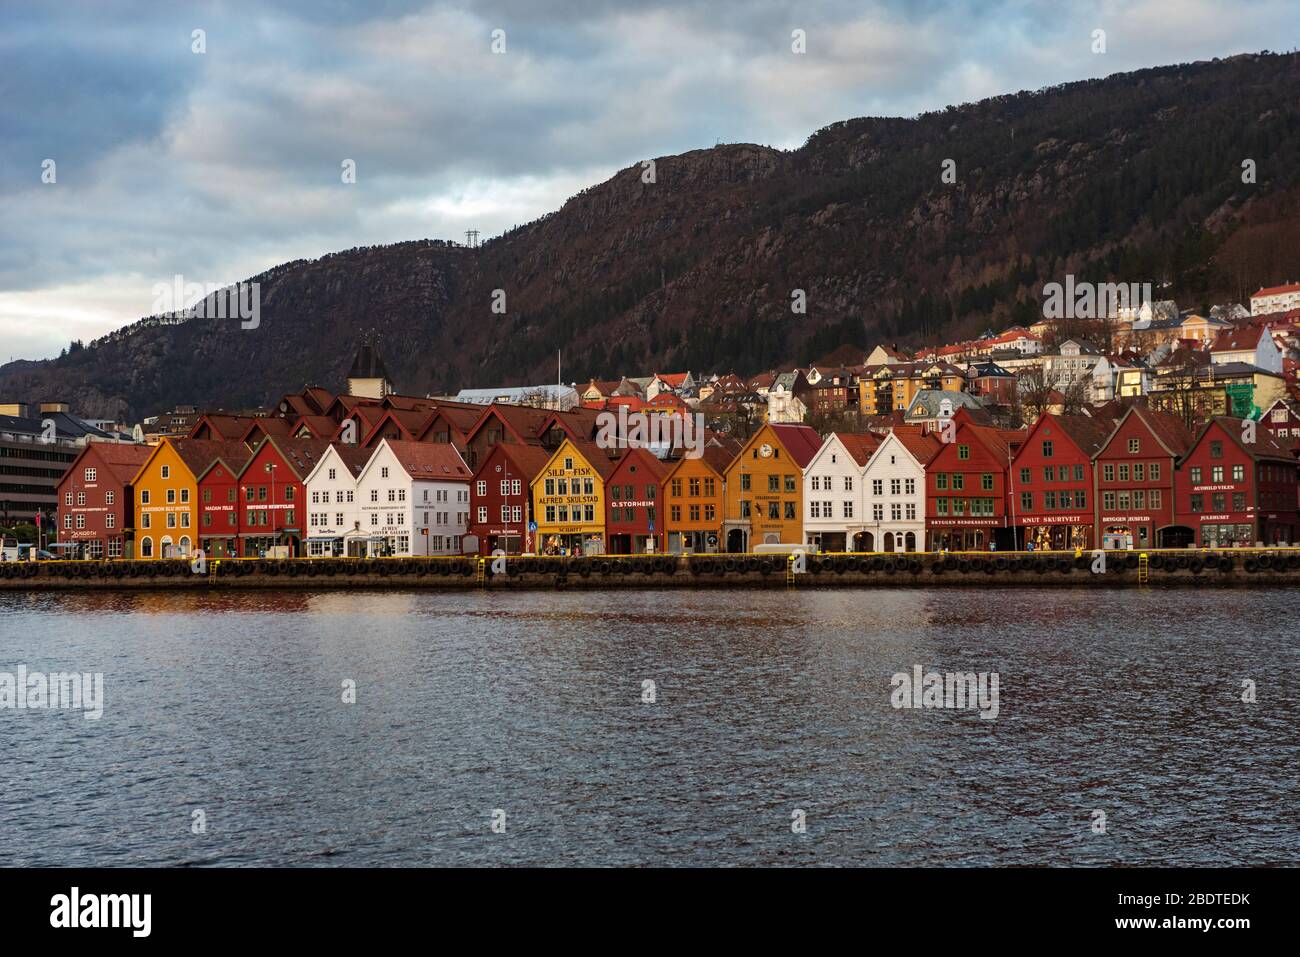 A usually popular tourist destination Bryggen a World heritage site UNESCO in Bergen, Norway during the covid-19 epidemic 2020 Easter time. Stock Photo